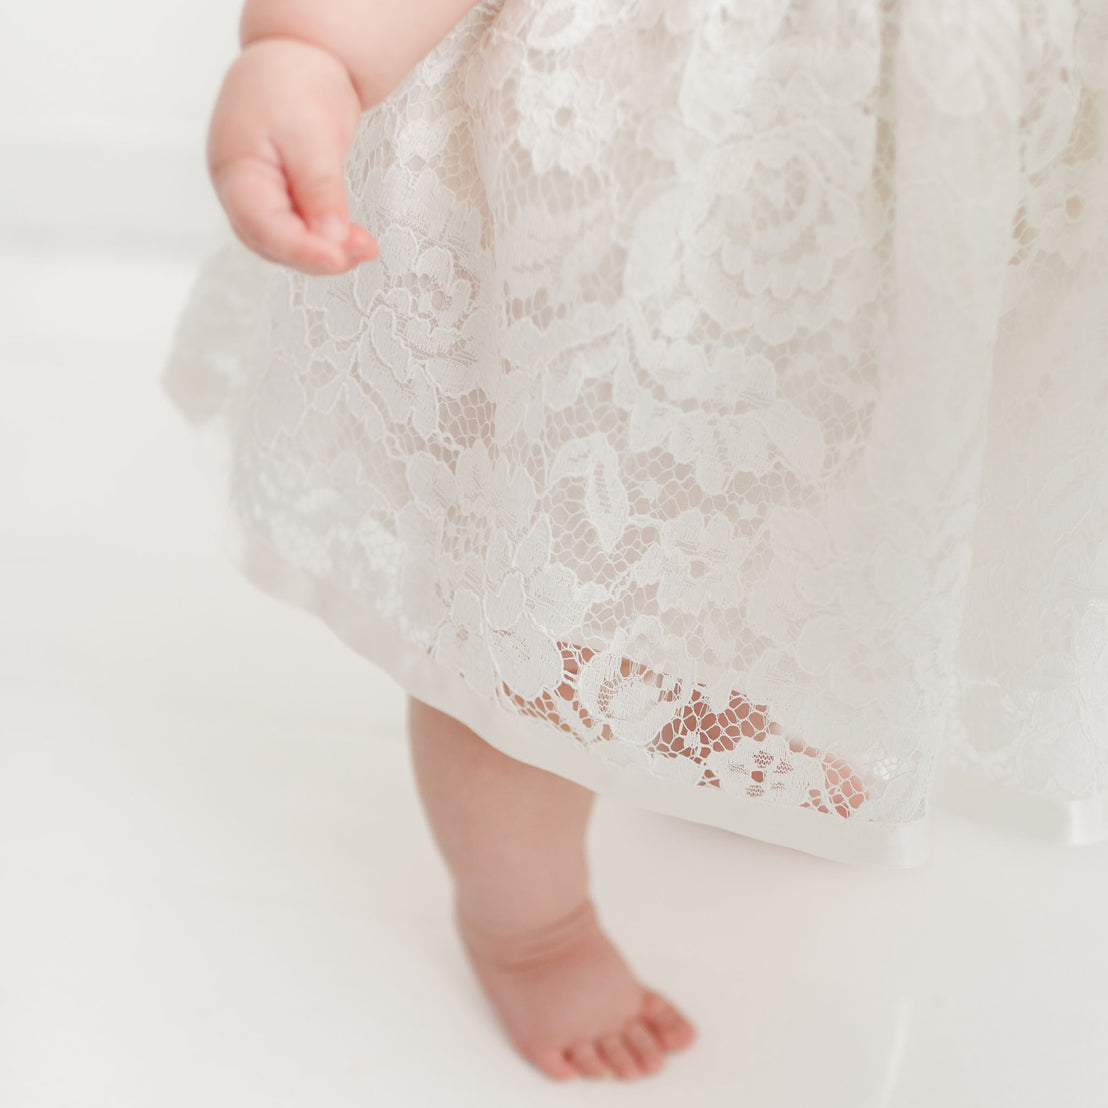 Close-up of a baby's lower body wearing a Rose Romper Dress, showing one bare foot and the hem of the dress. The background is plain white, emphasizing the texture of the lace.